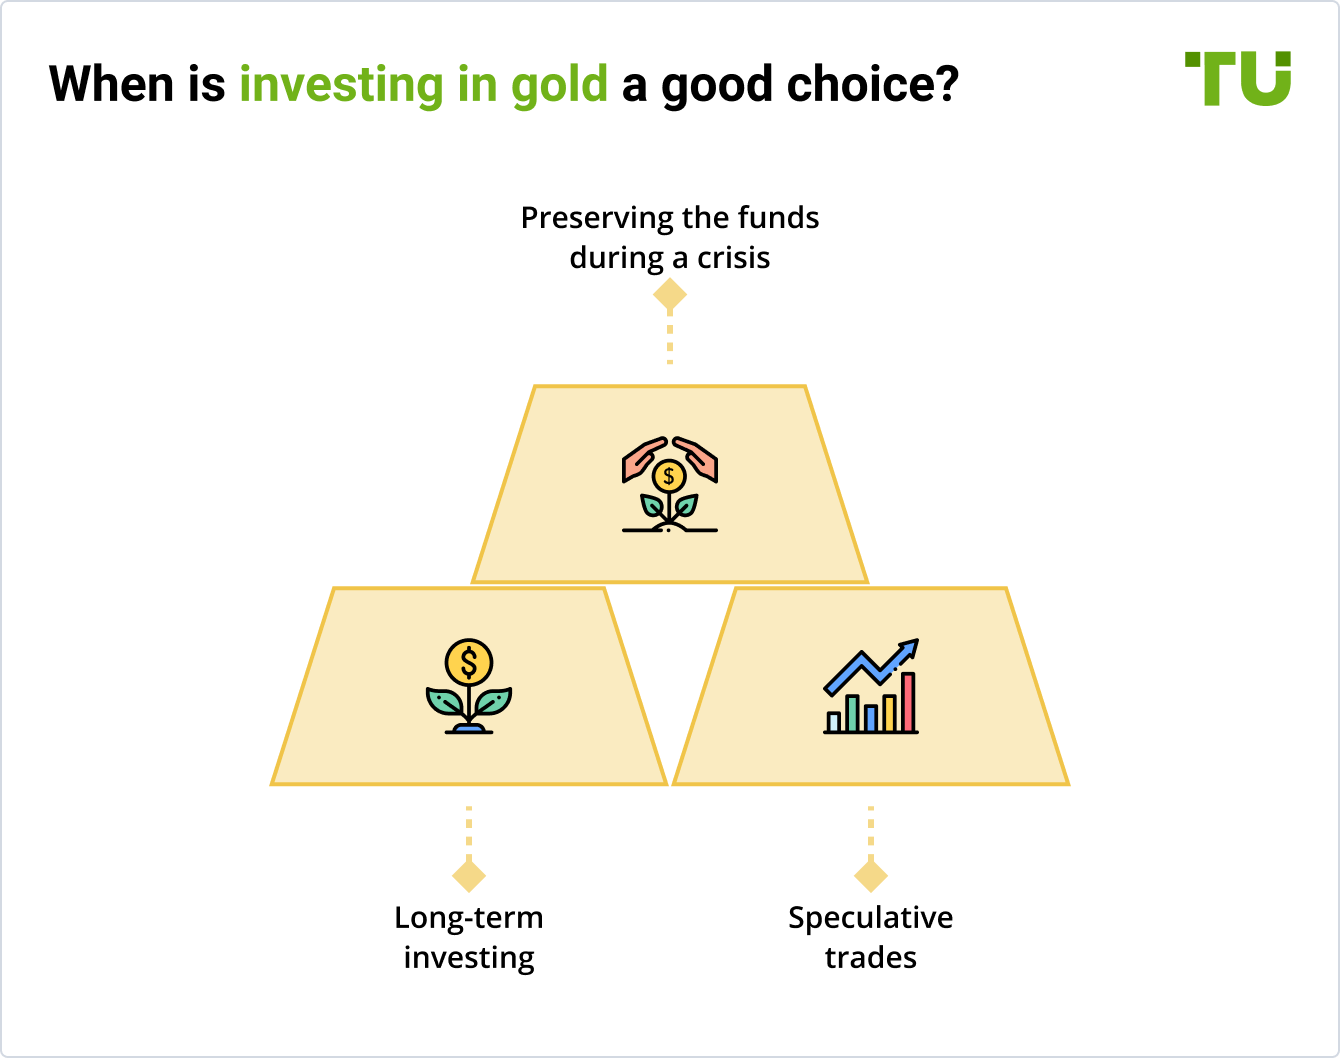 When is investing in gold a good choice?